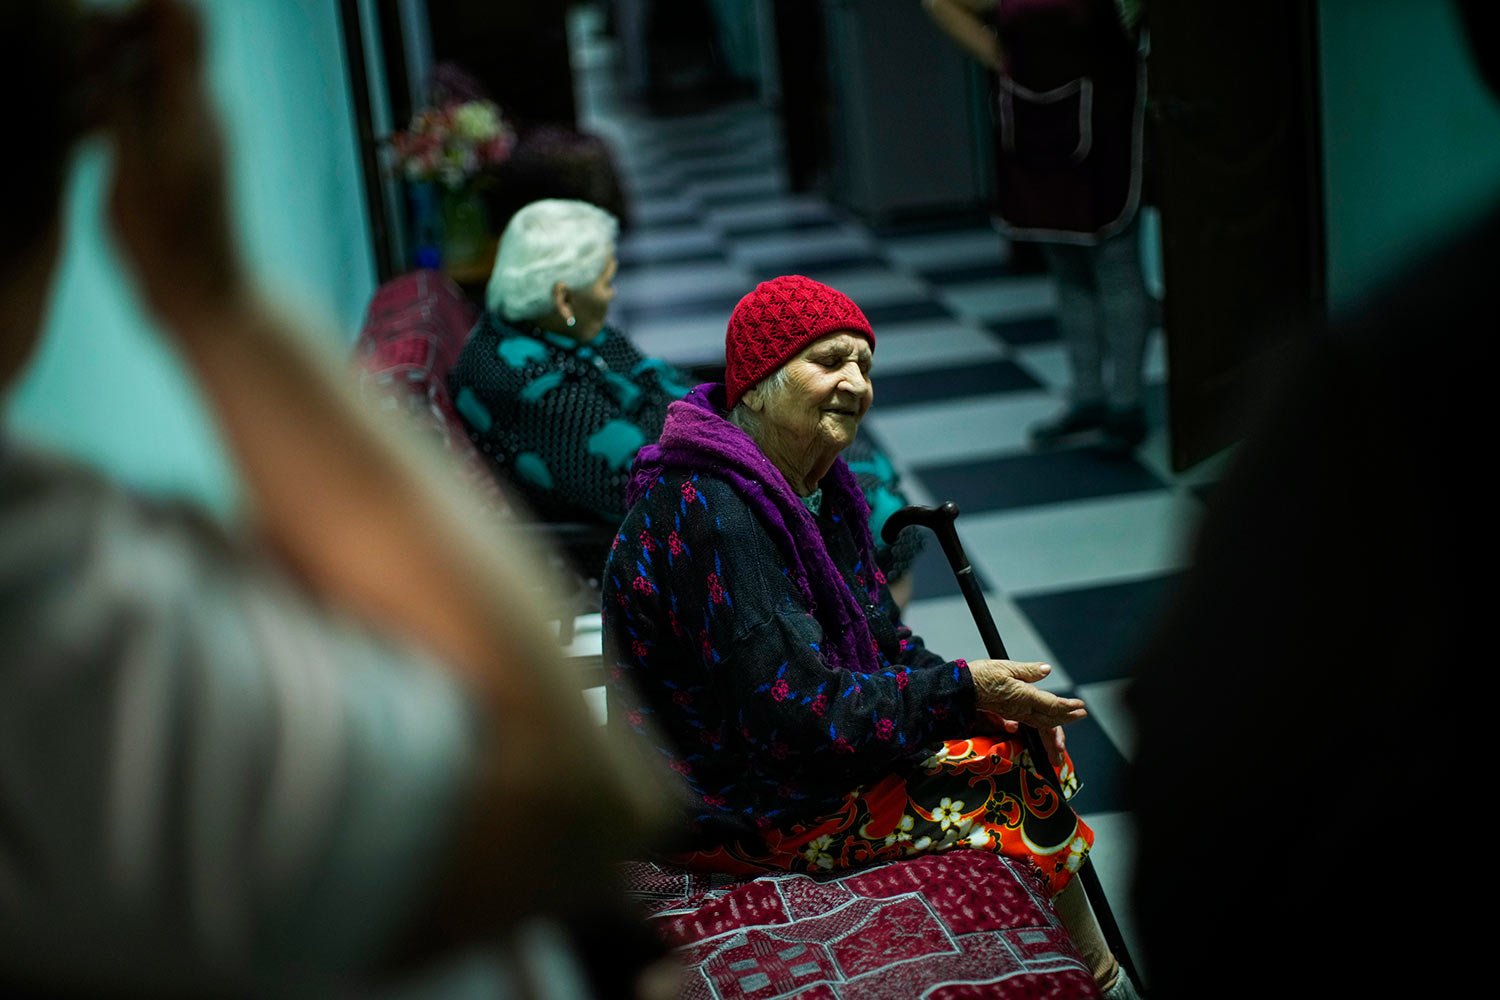  Anna Loboda, 93, a former choir member who fled from Donetsk region, sings a song at Saint Michael monastery, in Odesa, Ukraine, Friday, May 13, 2022. Loboda, who has no family, has been living in the monastery's facility for the elderly since she w